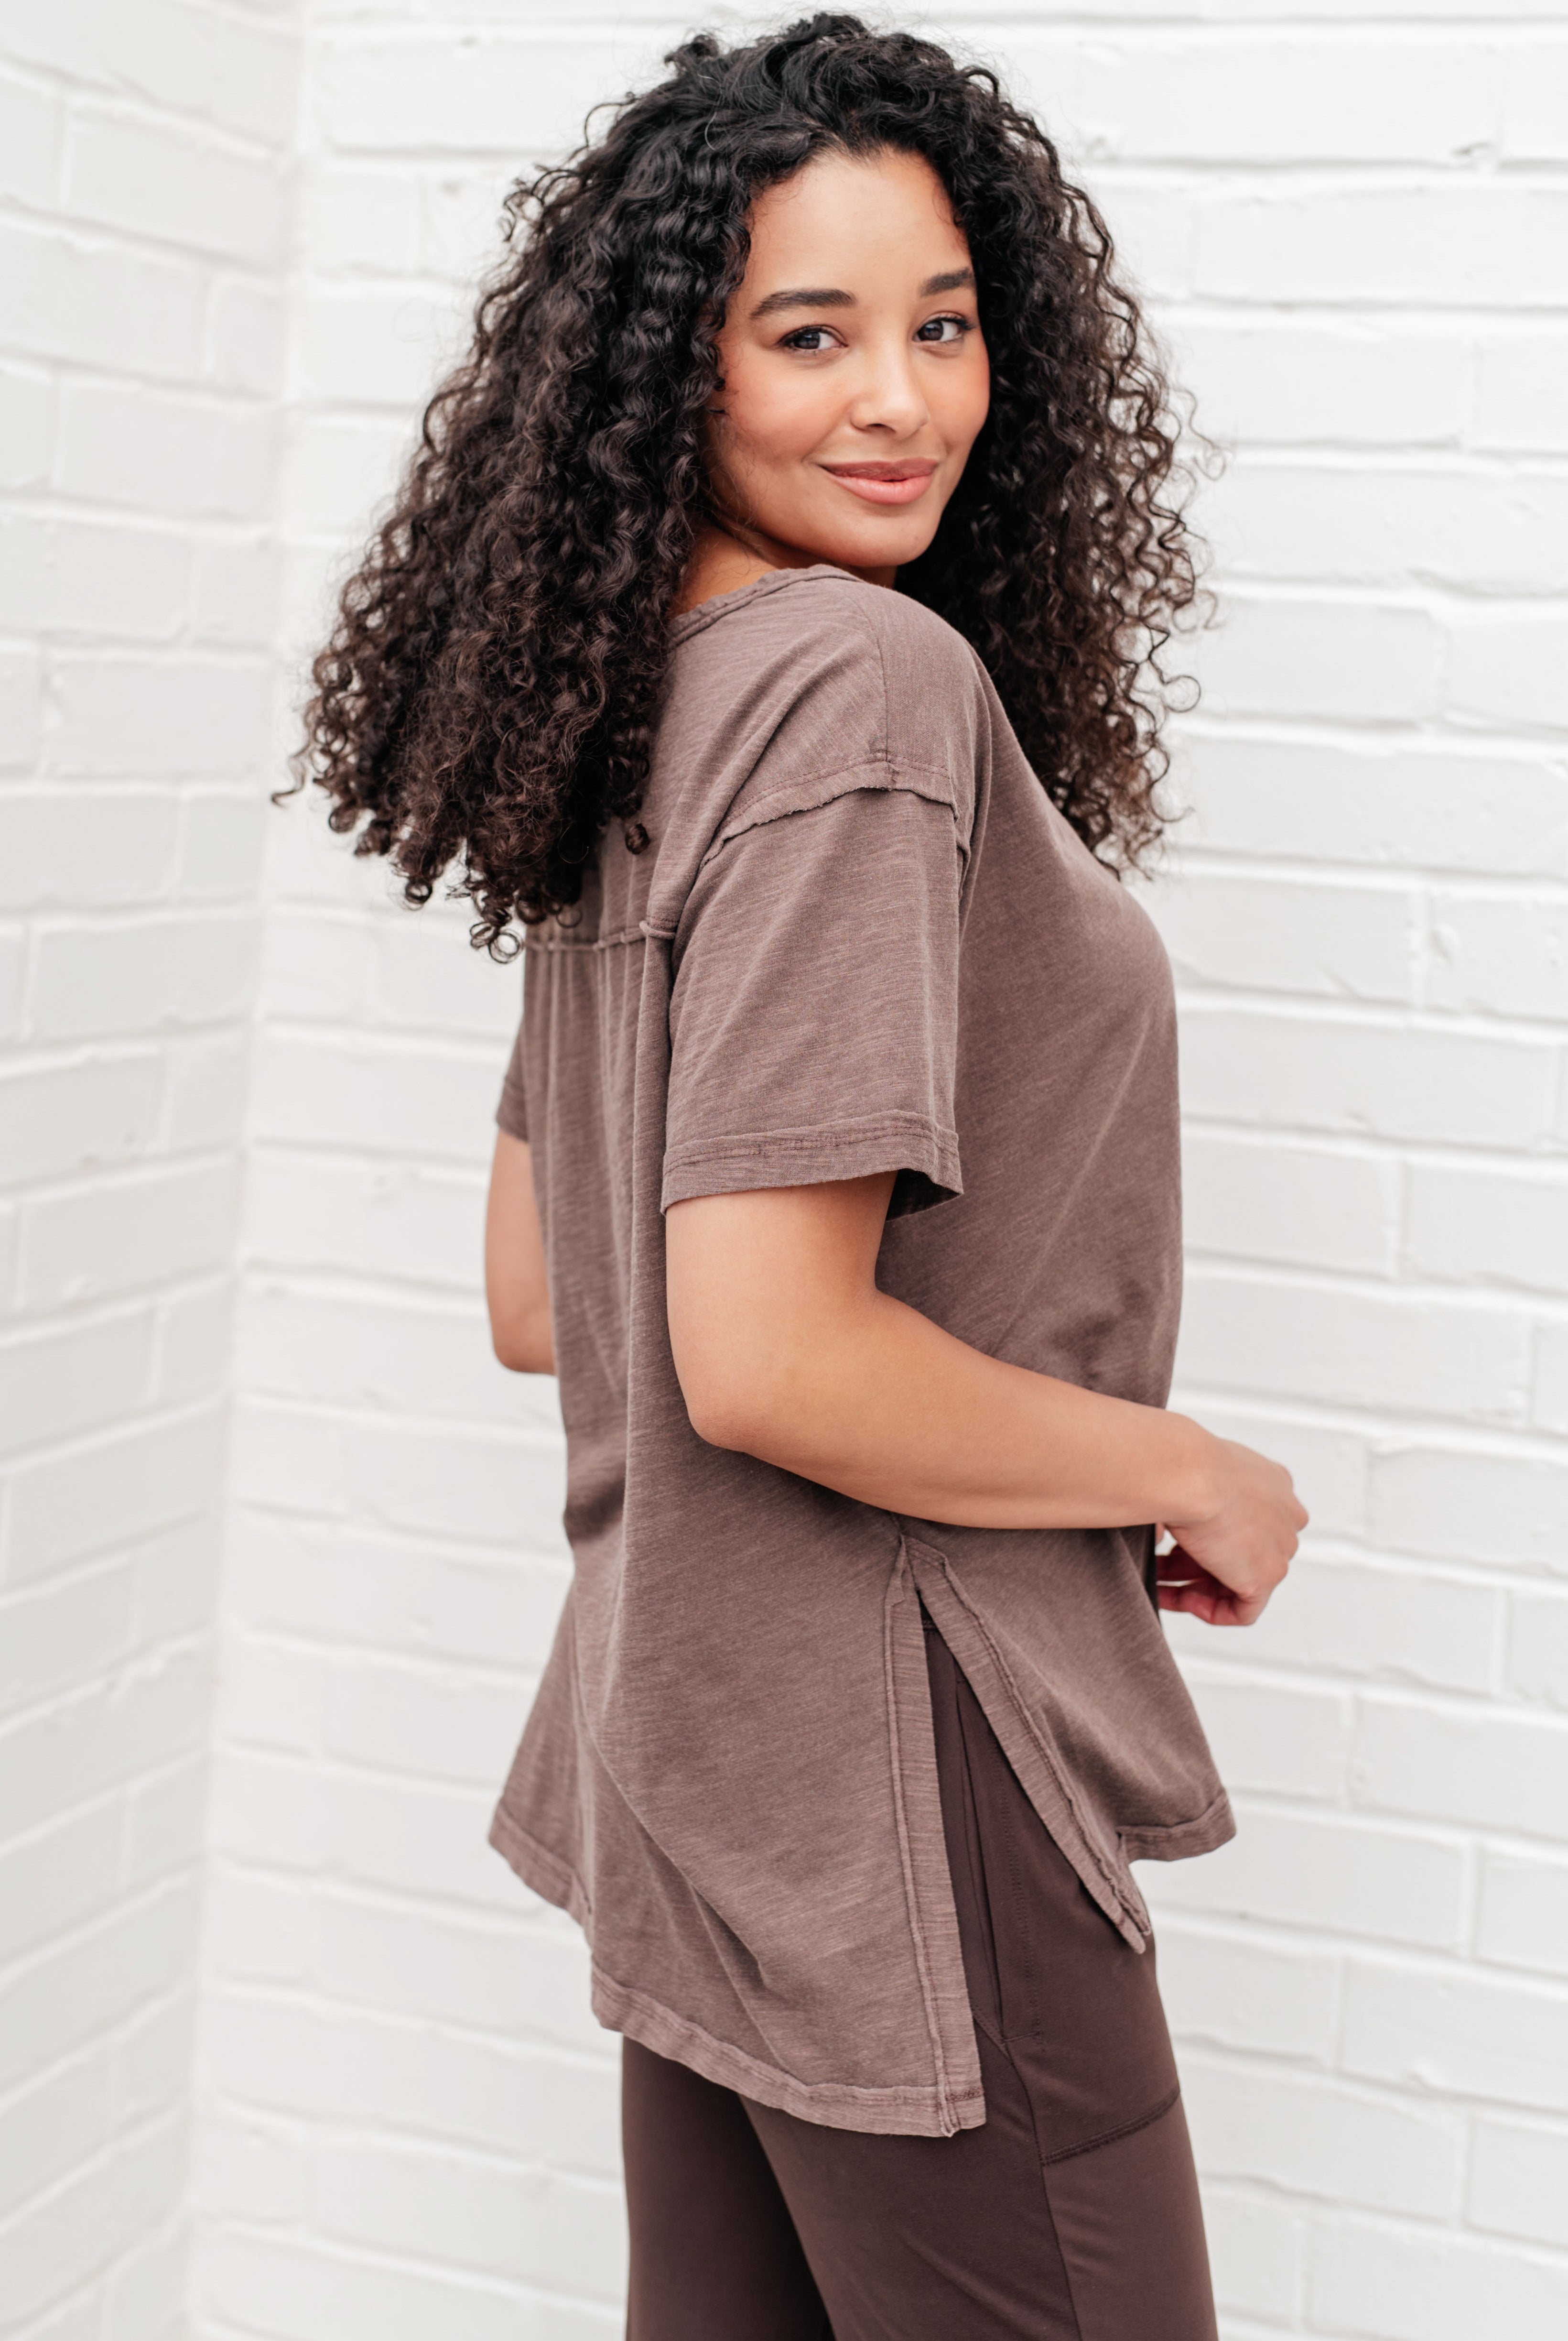 Let Me Live Relaxed Tee in Brown-Tops-Ave Shops-Urban Threadz Boutique, Women's Fashion Boutique in Saugatuck, MI